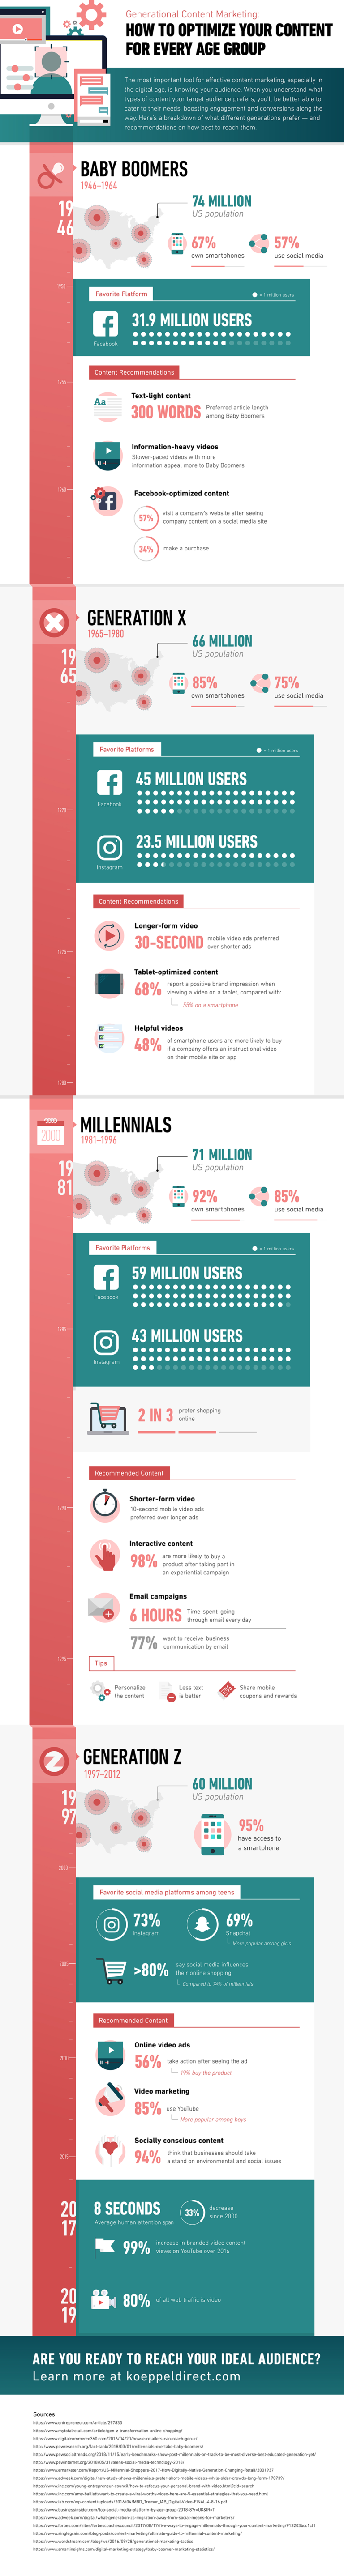 generational-content-marketing-timeline-infographic-koeppel-direct-768x5756